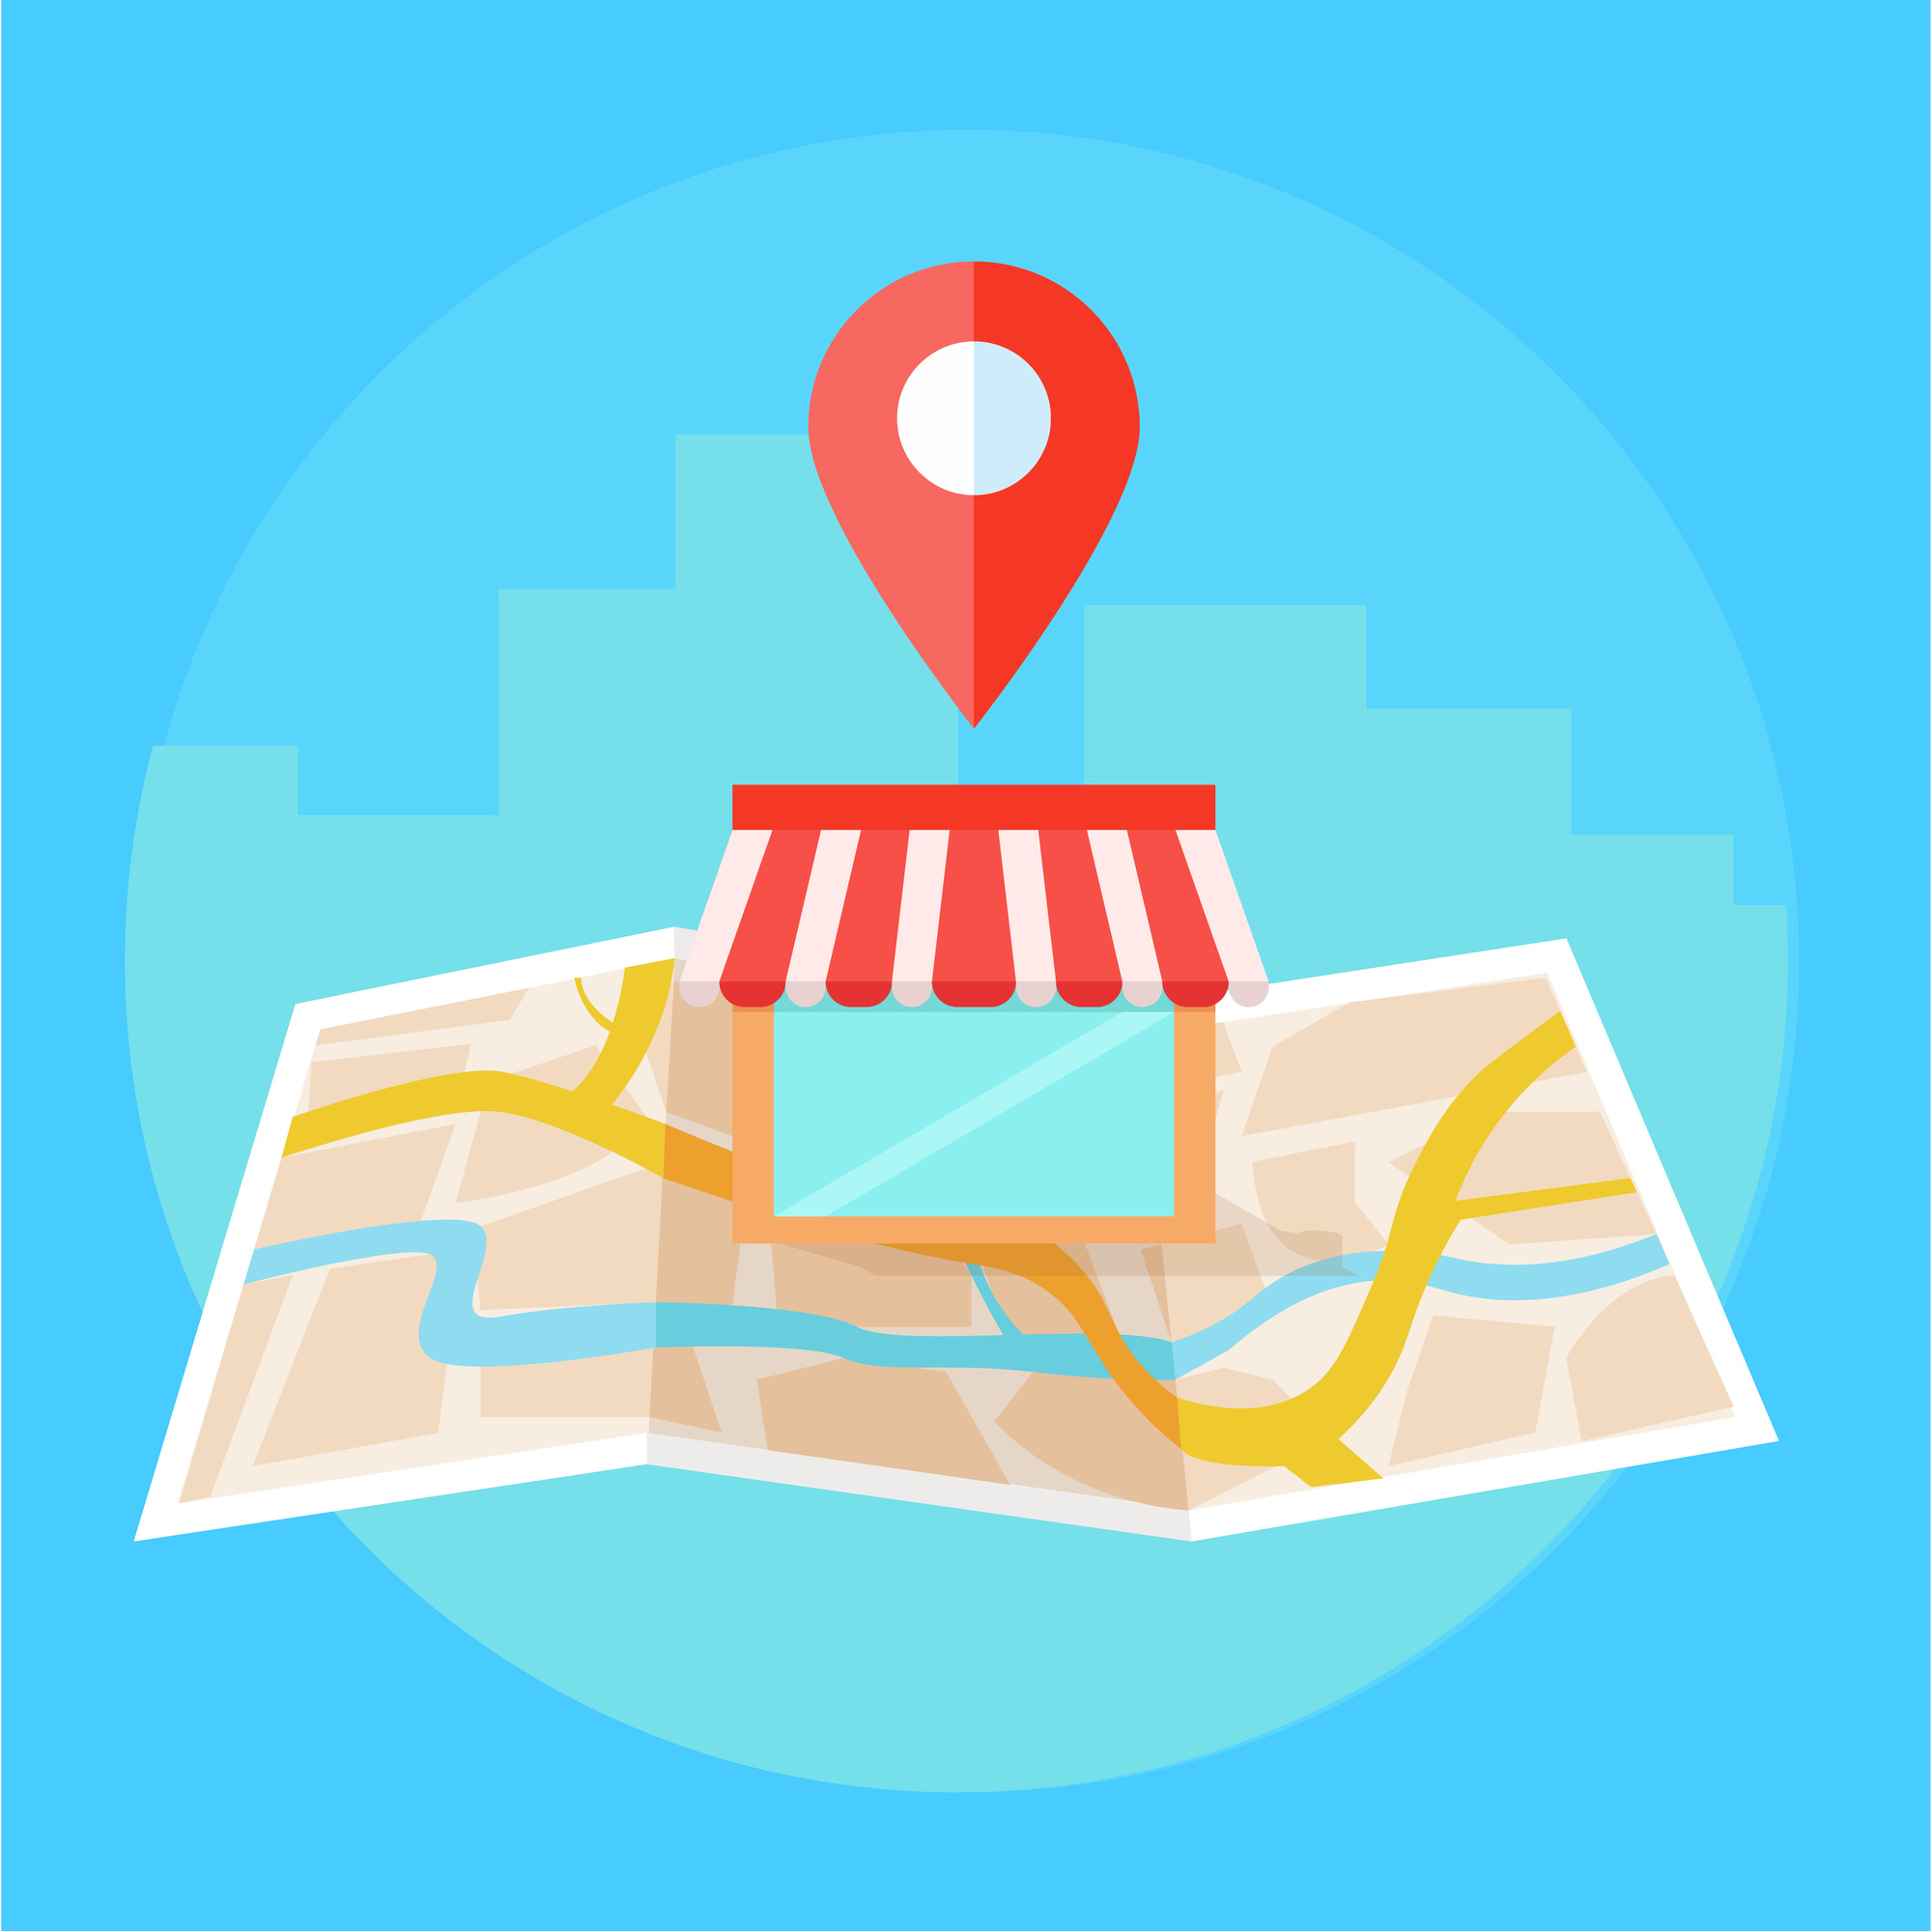 Local Business Seo Services